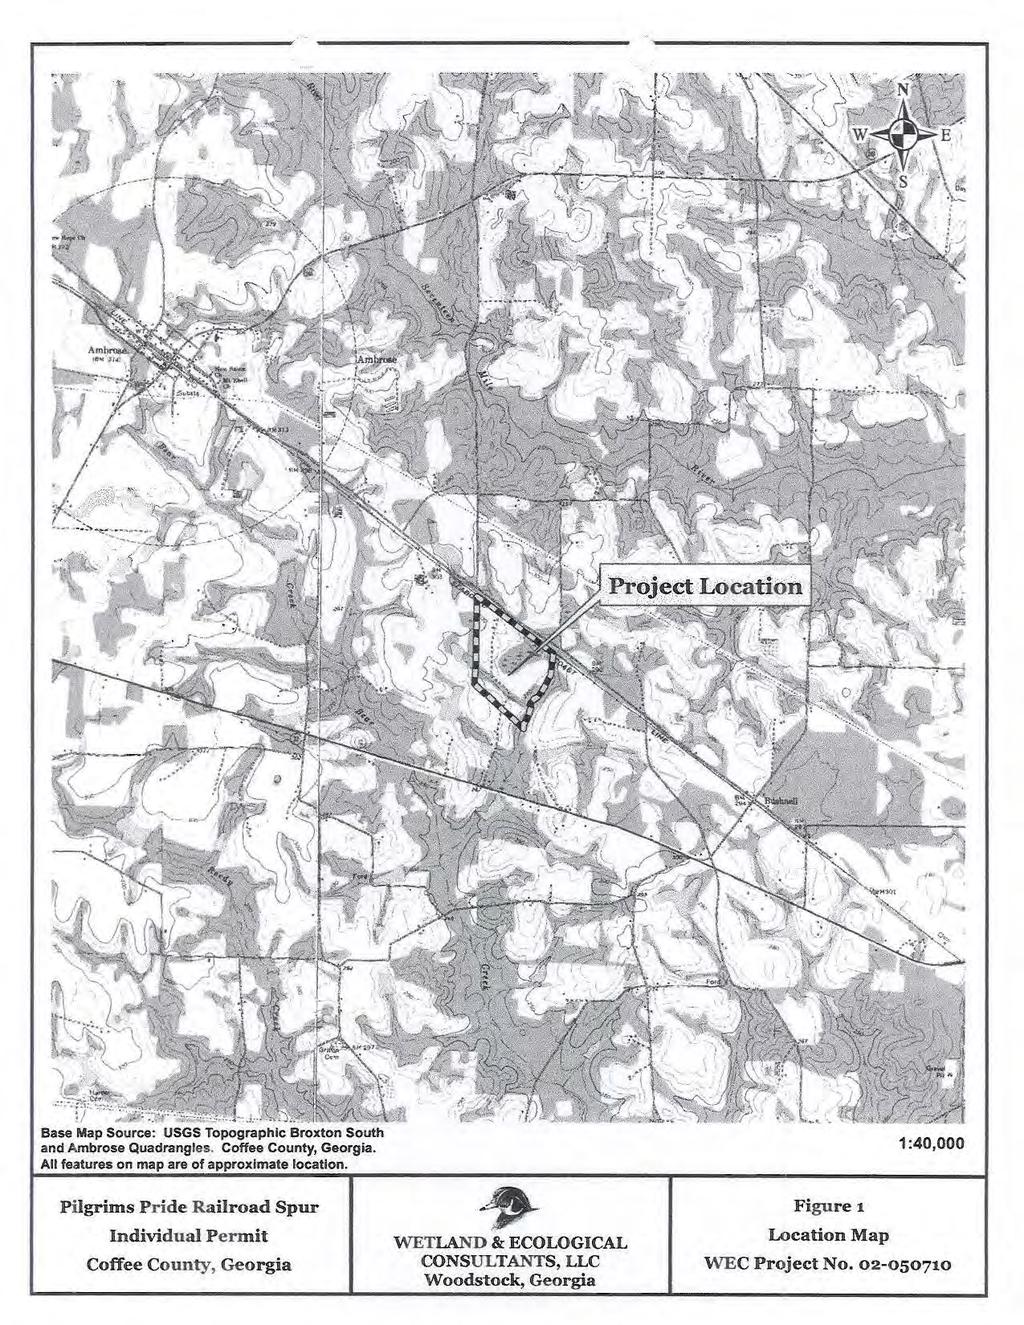 Base Map Source: USGS Topographic Broxton South and Ambrose Quadrangles. Coffee County, Georgia. All features on map are of approximate location.